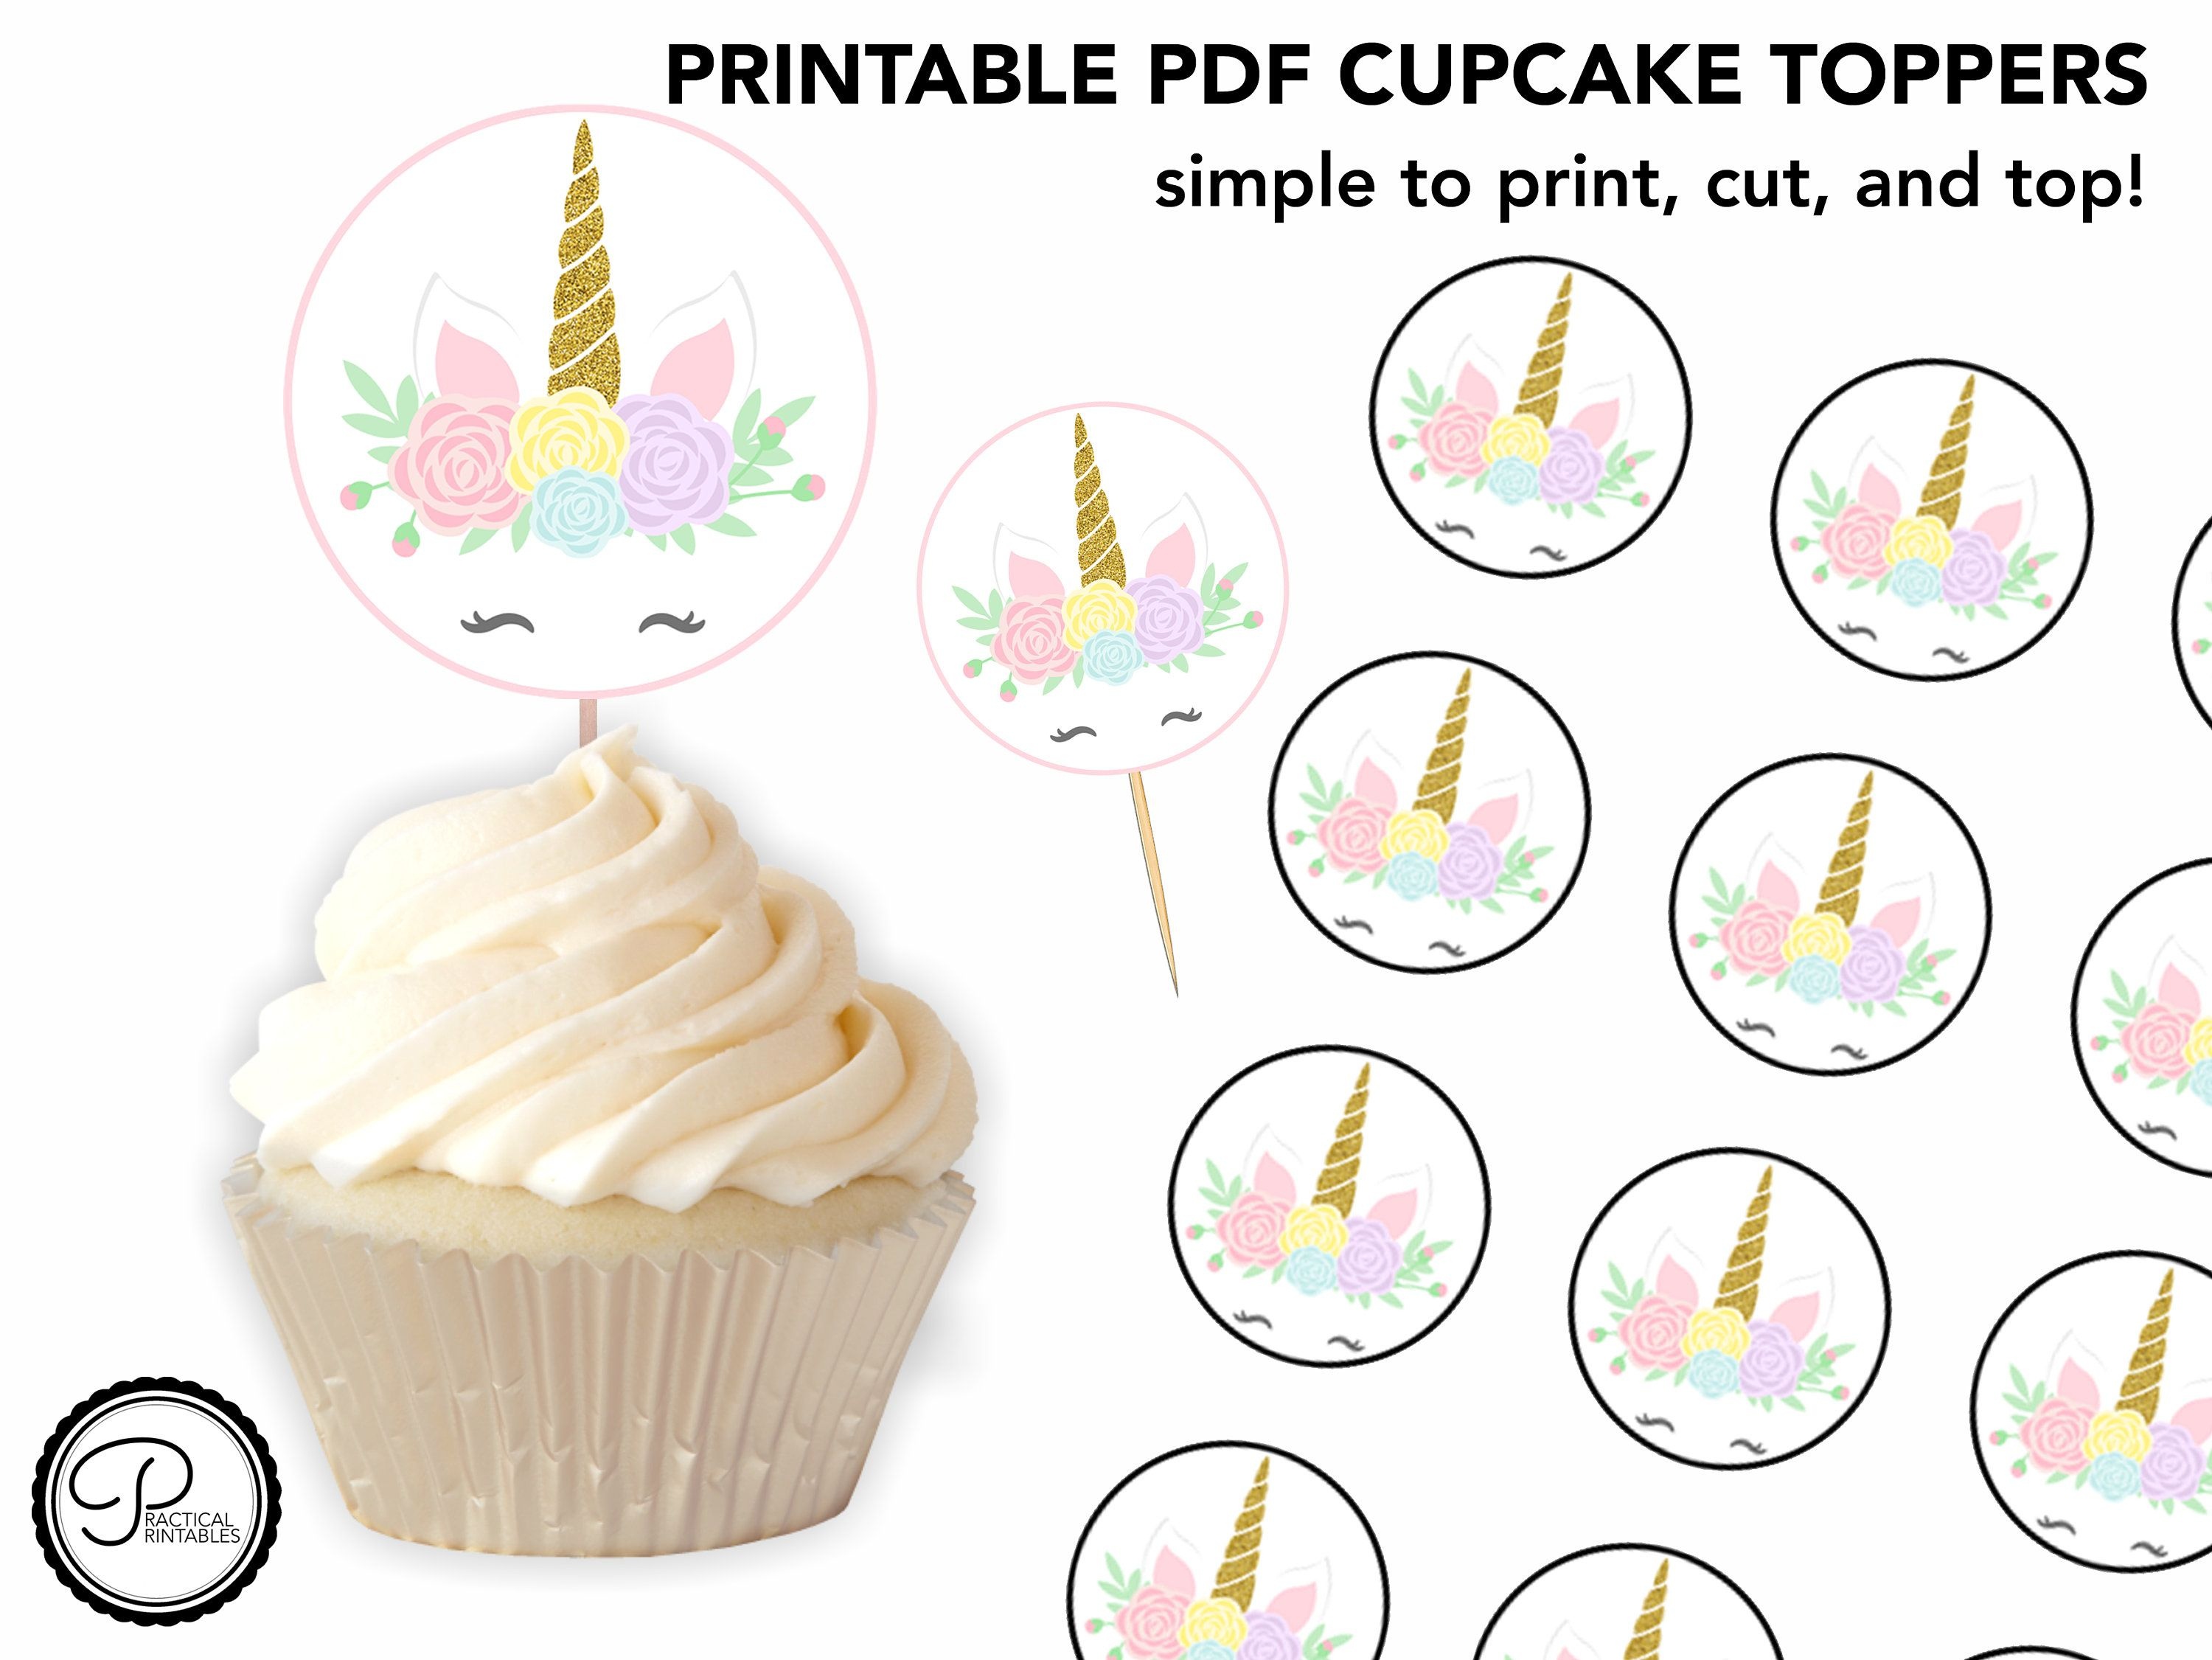 Printable Unicorn Cupcake Toppers - Perfect For A Simple Party - Free Printable Unicorn Cupcake Toppers